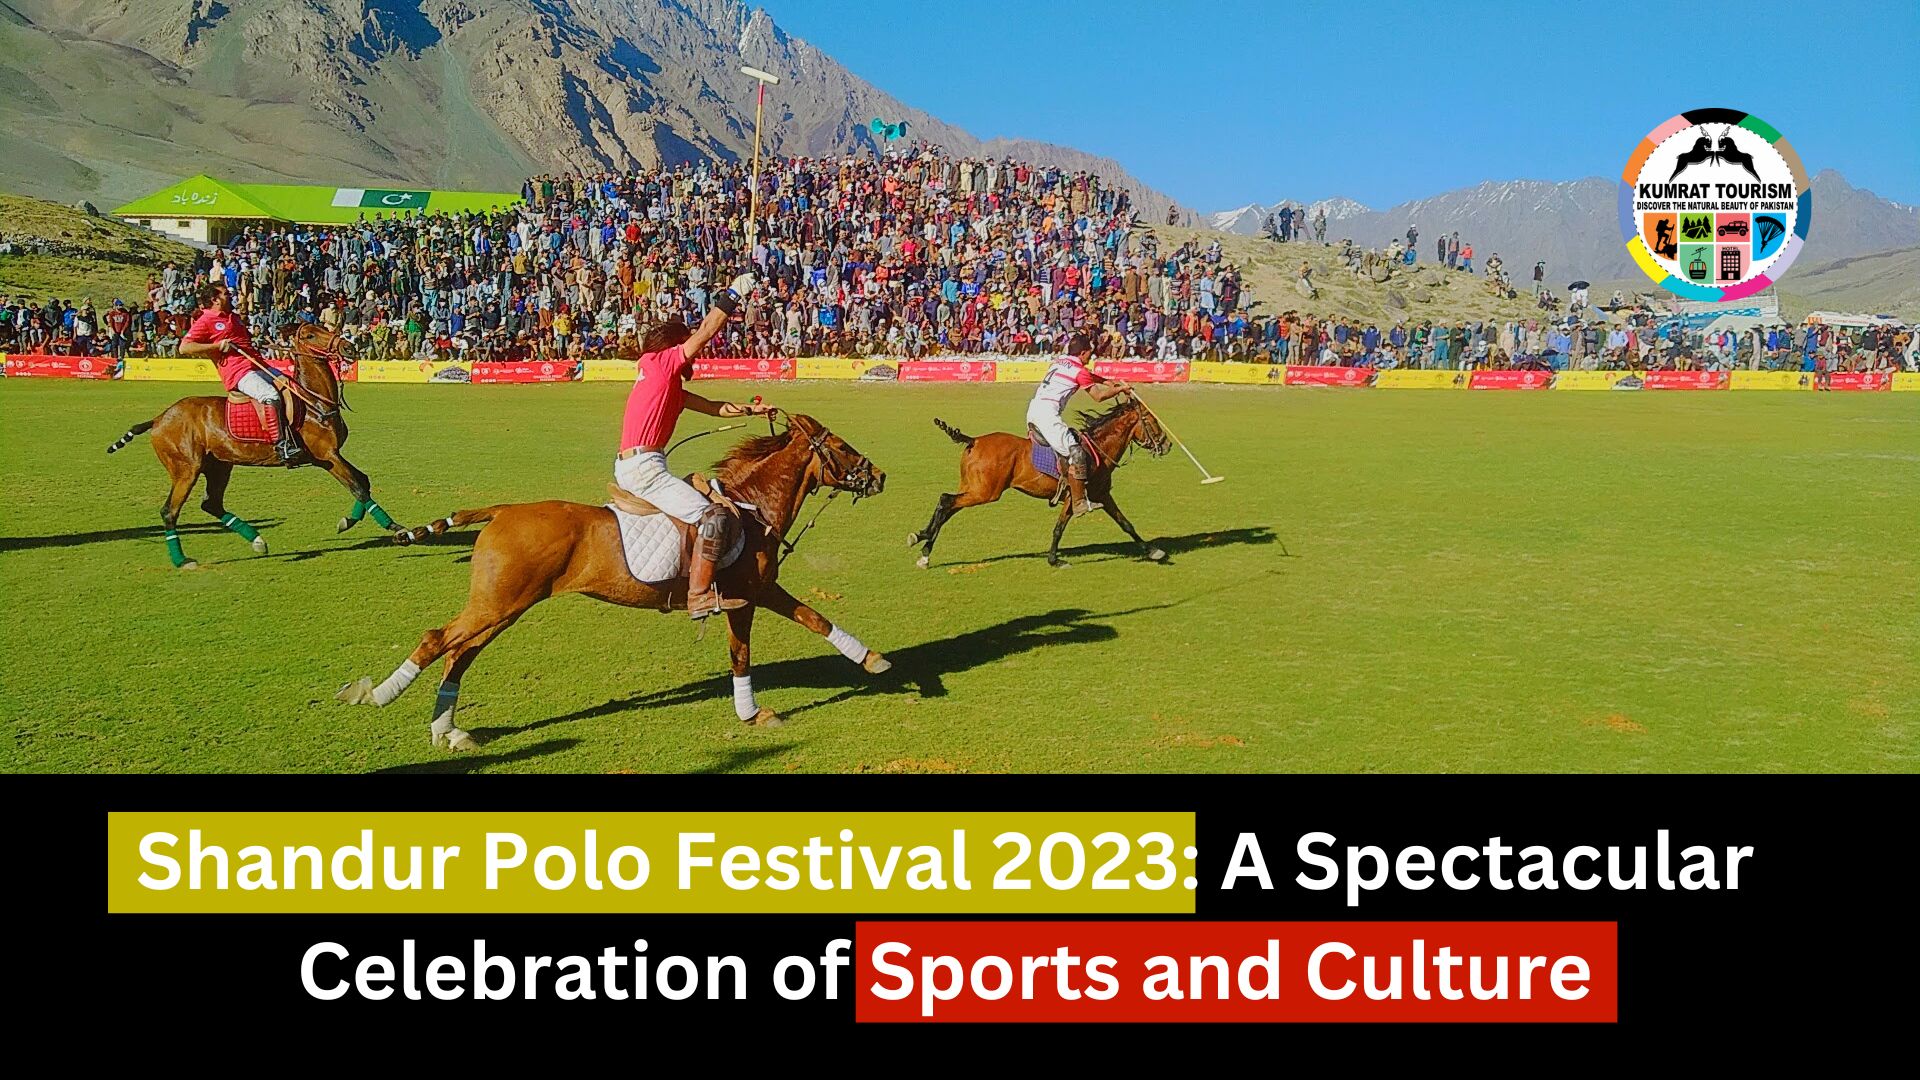 shandur-polo-festival-2023-a-spectacular-celebration-of-sports-and-culture/